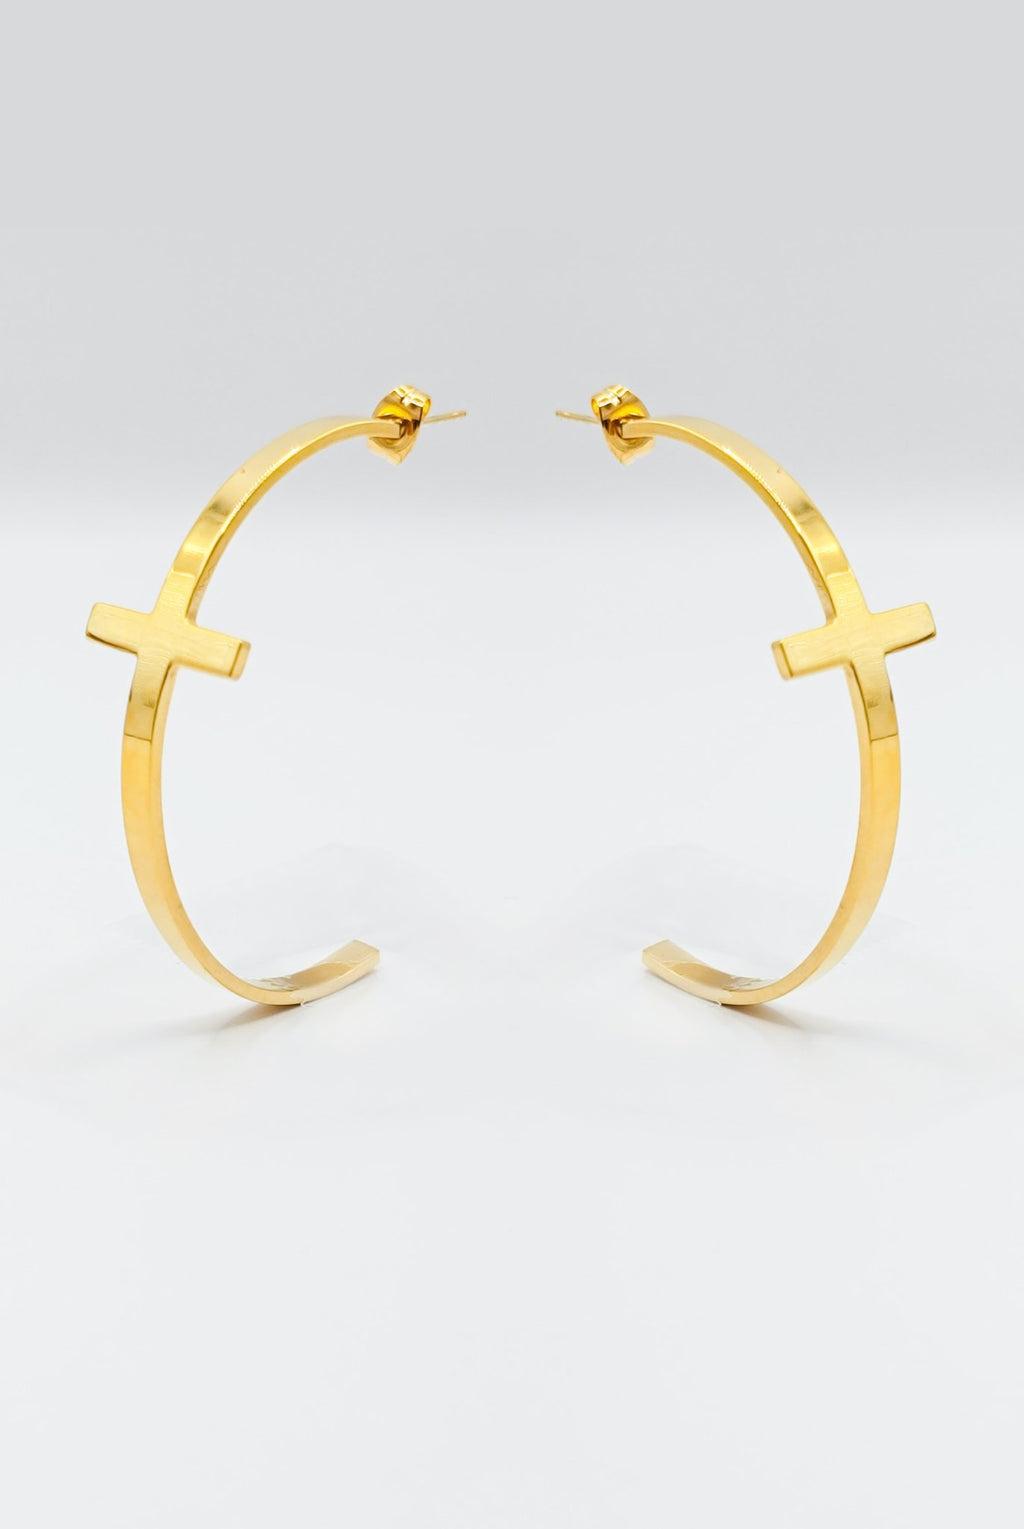 *Coming Soon* So Chic Cross 18k Gold Plated Hoops - A Meaningful Mood